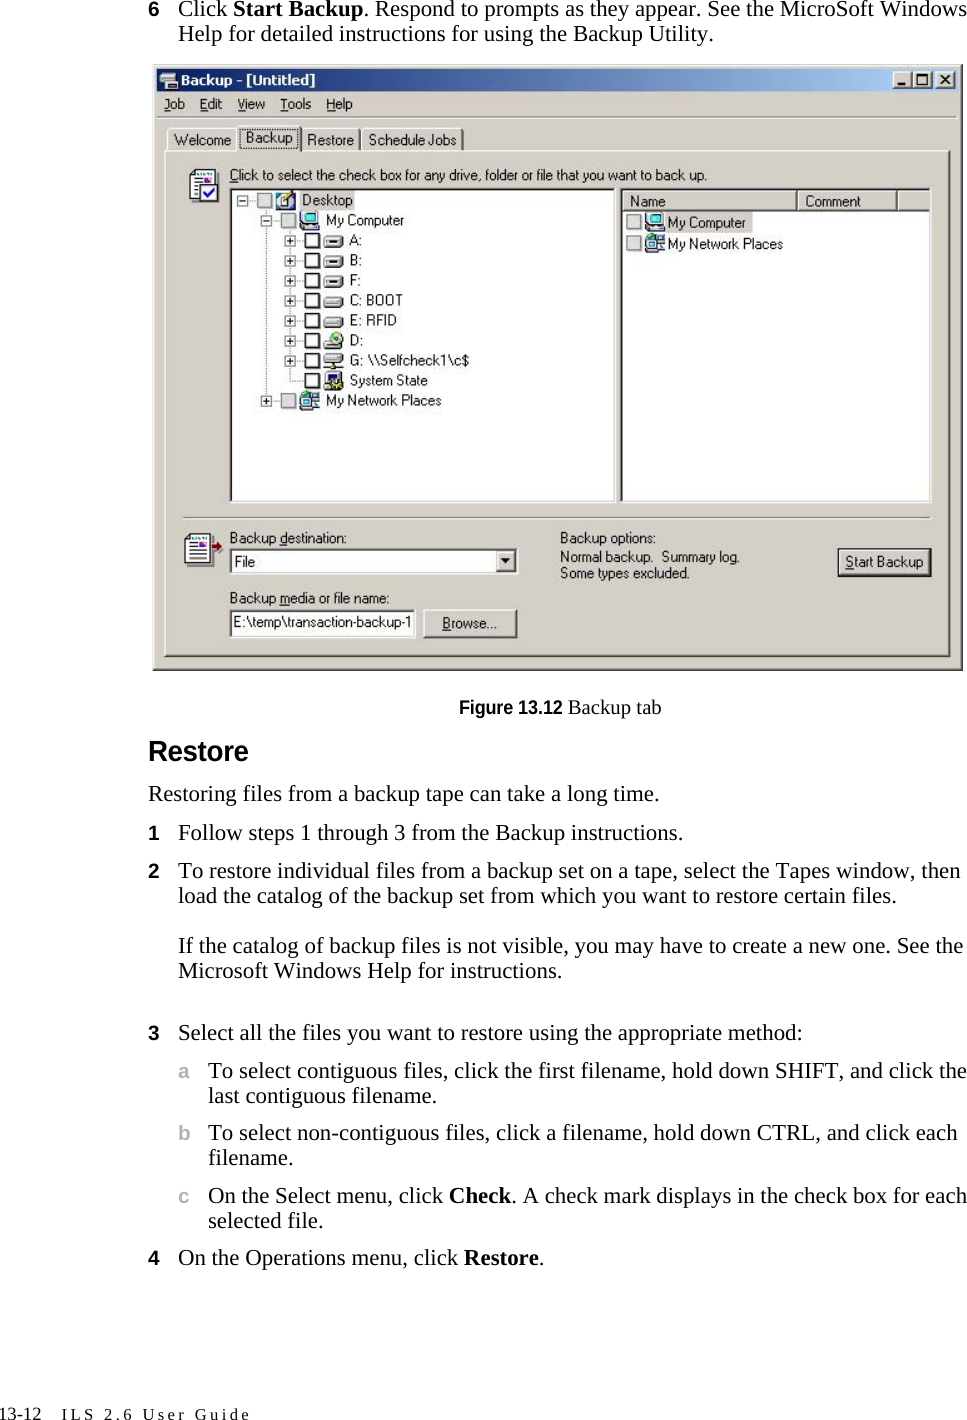 13-12 ILS 2.6 User Guide6Click Start Backup. Respond to prompts as they appear. See the MicroSoft Windows Help for detailed instructions for using the Backup Utility.Figure 13.12 Backup tabRestoreRestoring files from a backup tape can take a long time.1Follow steps 1 through 3 from the Backup instructions.2To restore individual files from a backup set on a tape, select the Tapes window, then load the catalog of the backup set from which you want to restore certain files.If the catalog of backup files is not visible, you may have to create a new one. See the Microsoft Windows Help for instructions.3Select all the files you want to restore using the appropriate method:aTo select contiguous files, click the first filename, hold down SHIFT, and click the last contiguous filename.bTo select non-contiguous files, click a filename, hold down CTRL, and click each filename.cOn the Select menu, click Check. A check mark displays in the check box for each selected file.4On the Operations menu, click Restore.